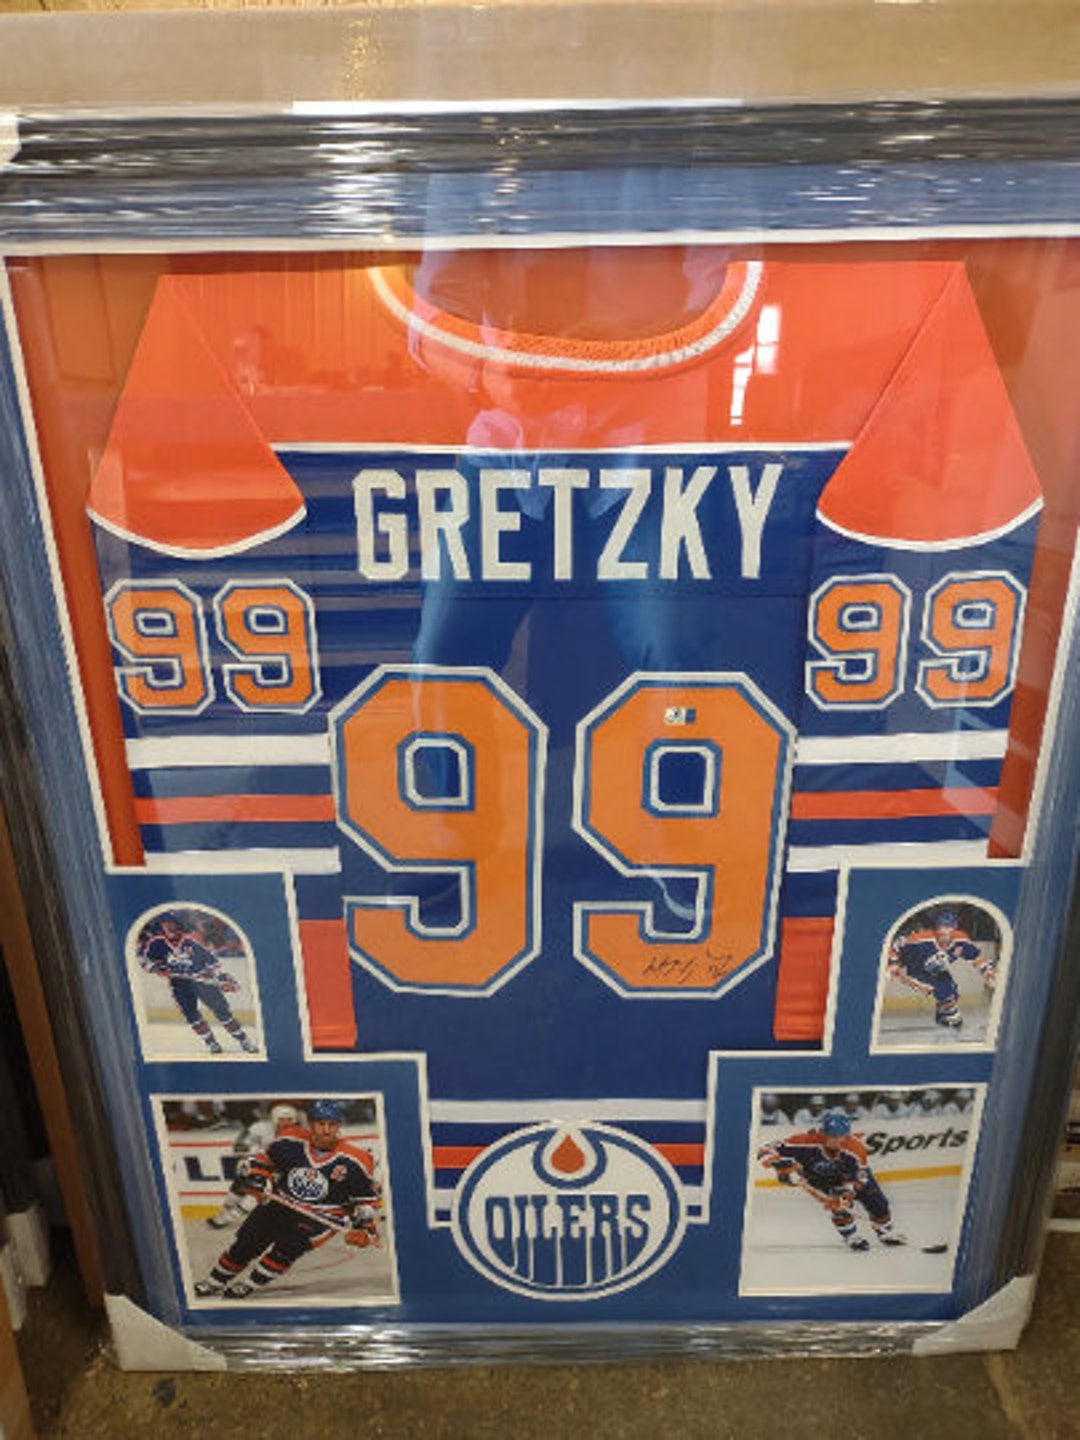 Wayne Gretzky Signed Custom Framed Authentic Oilers Jersey with